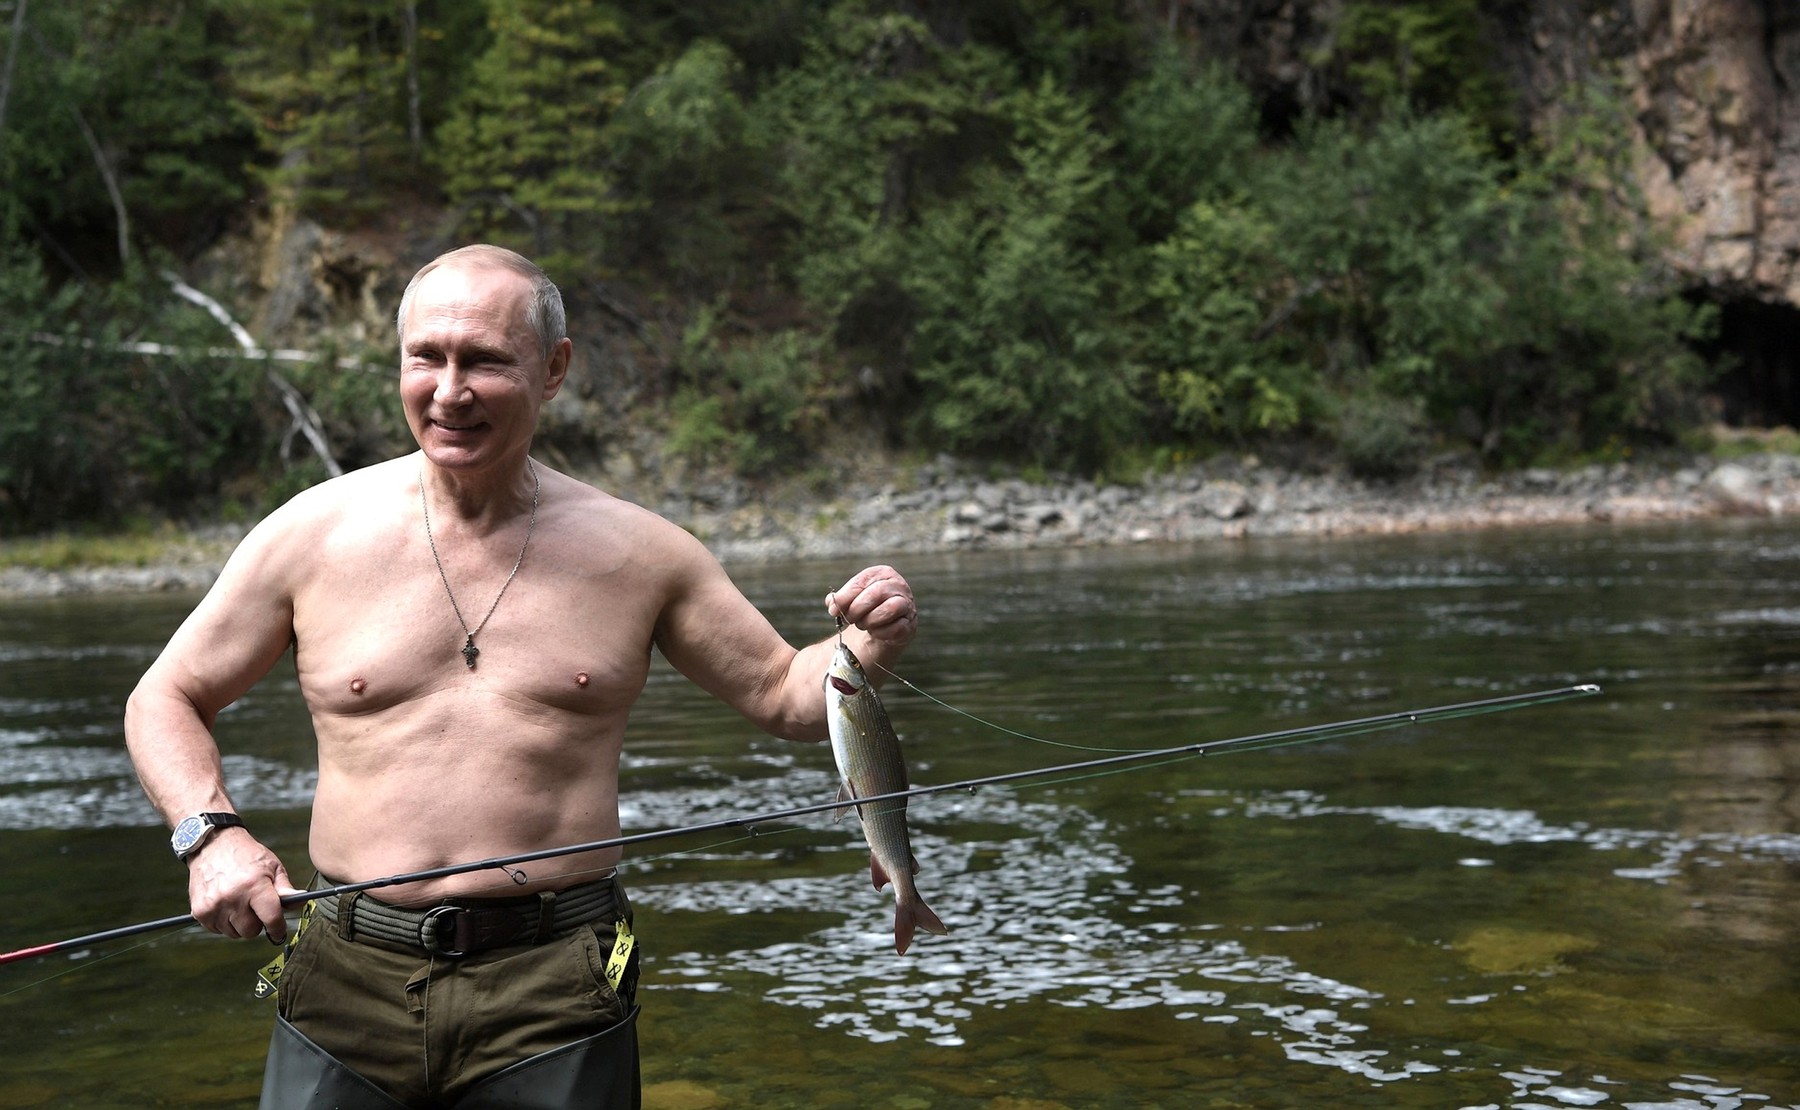 August 3, 2017 - Tyva, Tyva, Russia - Russian President Vladimir Putin holds a fish he caught fishing during a three-day fishing and hunting trip in the Siberian wilderness near the Mongolian border August 1-3, 2017 in the Tyva Republic, Russia.,Image: 344547068, License: Rights-managed, Restrictions: , Model Release: no, Credit line: Profimedia